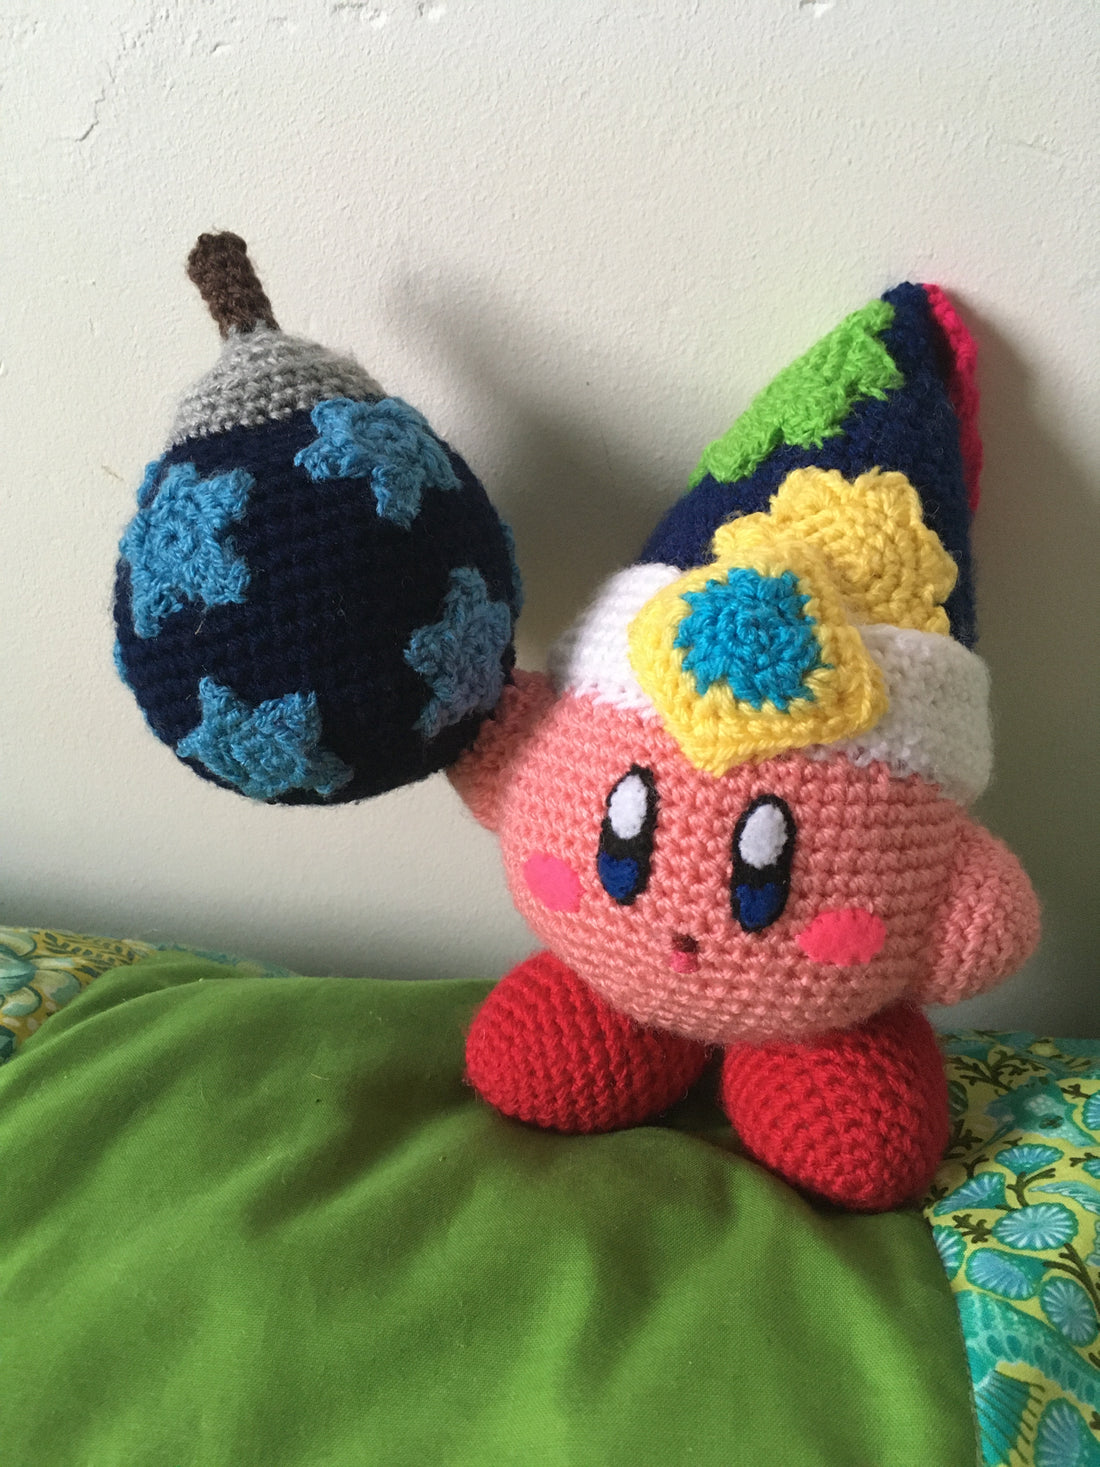 A Crocheted Plushie, Based on a Different Series